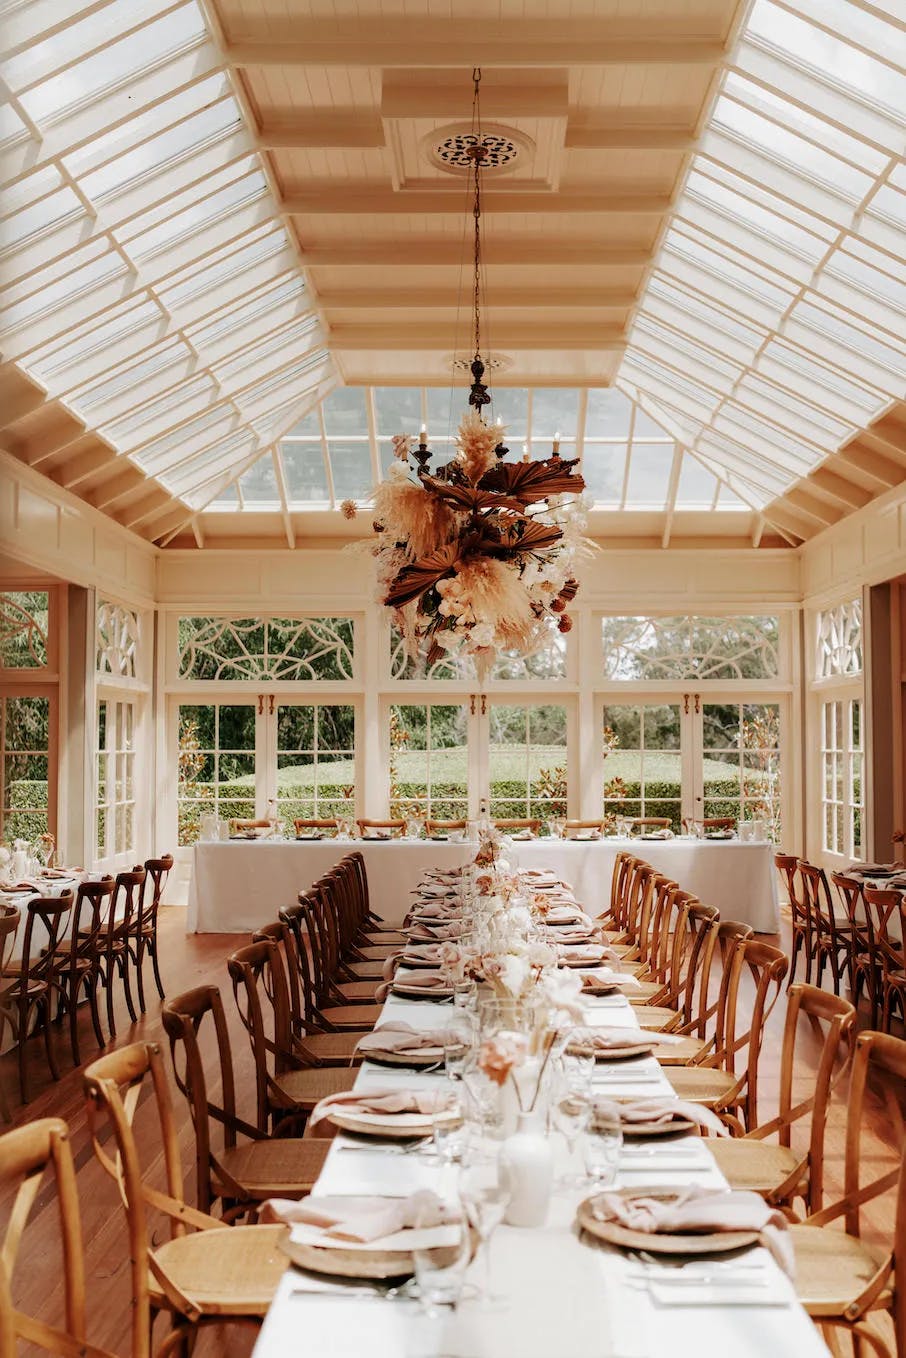 A long, elegant dining table is set for a formal meal in a bright room with large windows and a glass ceiling. The table is adorned with neatly arranged plates, glasses, and decorative centerpieces. Wooden chairs line both sides of the table, and greenery is visible outside.